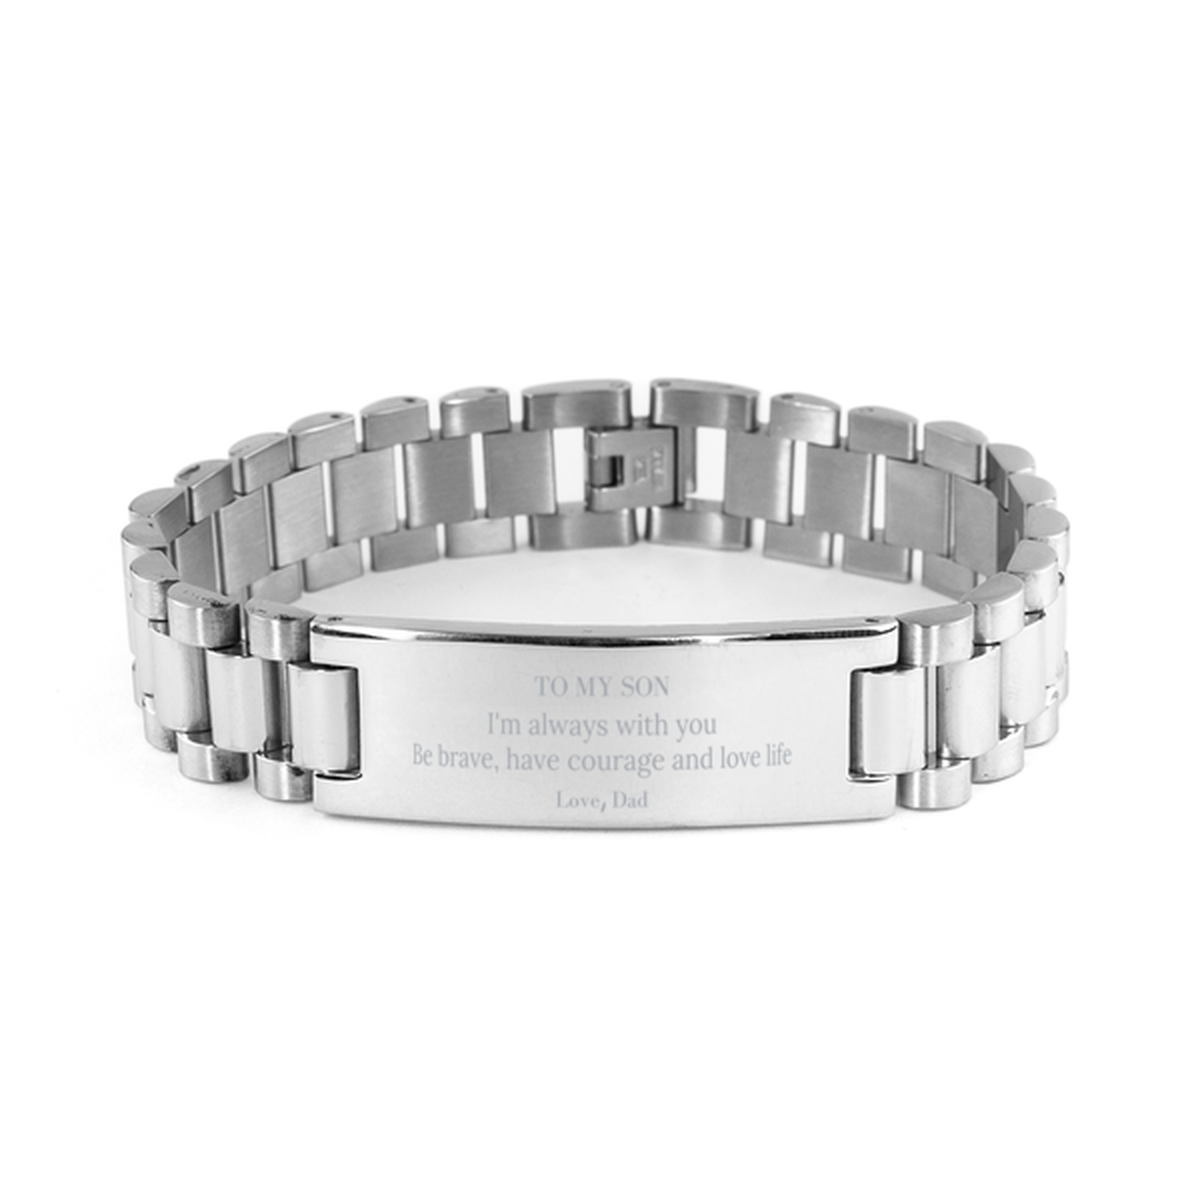 To My Son Gifts from Dad, Unique Ladder Stainless Steel Bracelet Inspirational Christmas Birthday Graduation Gifts for Son I'm always with you. Be brave, have courage and love life. Love, Dad